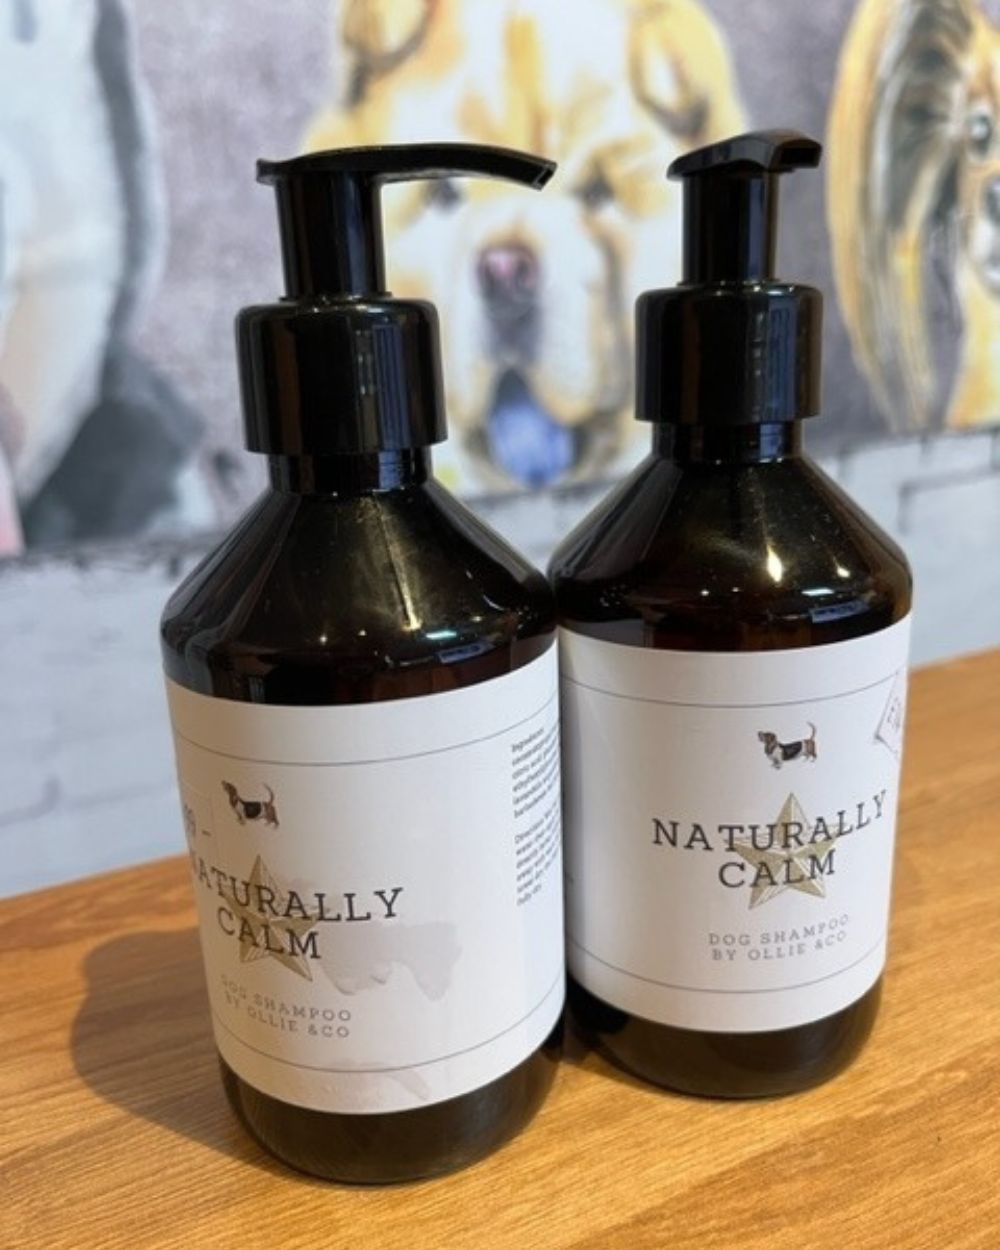 Ollie and Co Naturally Calm Dog Shampoo with Lavender